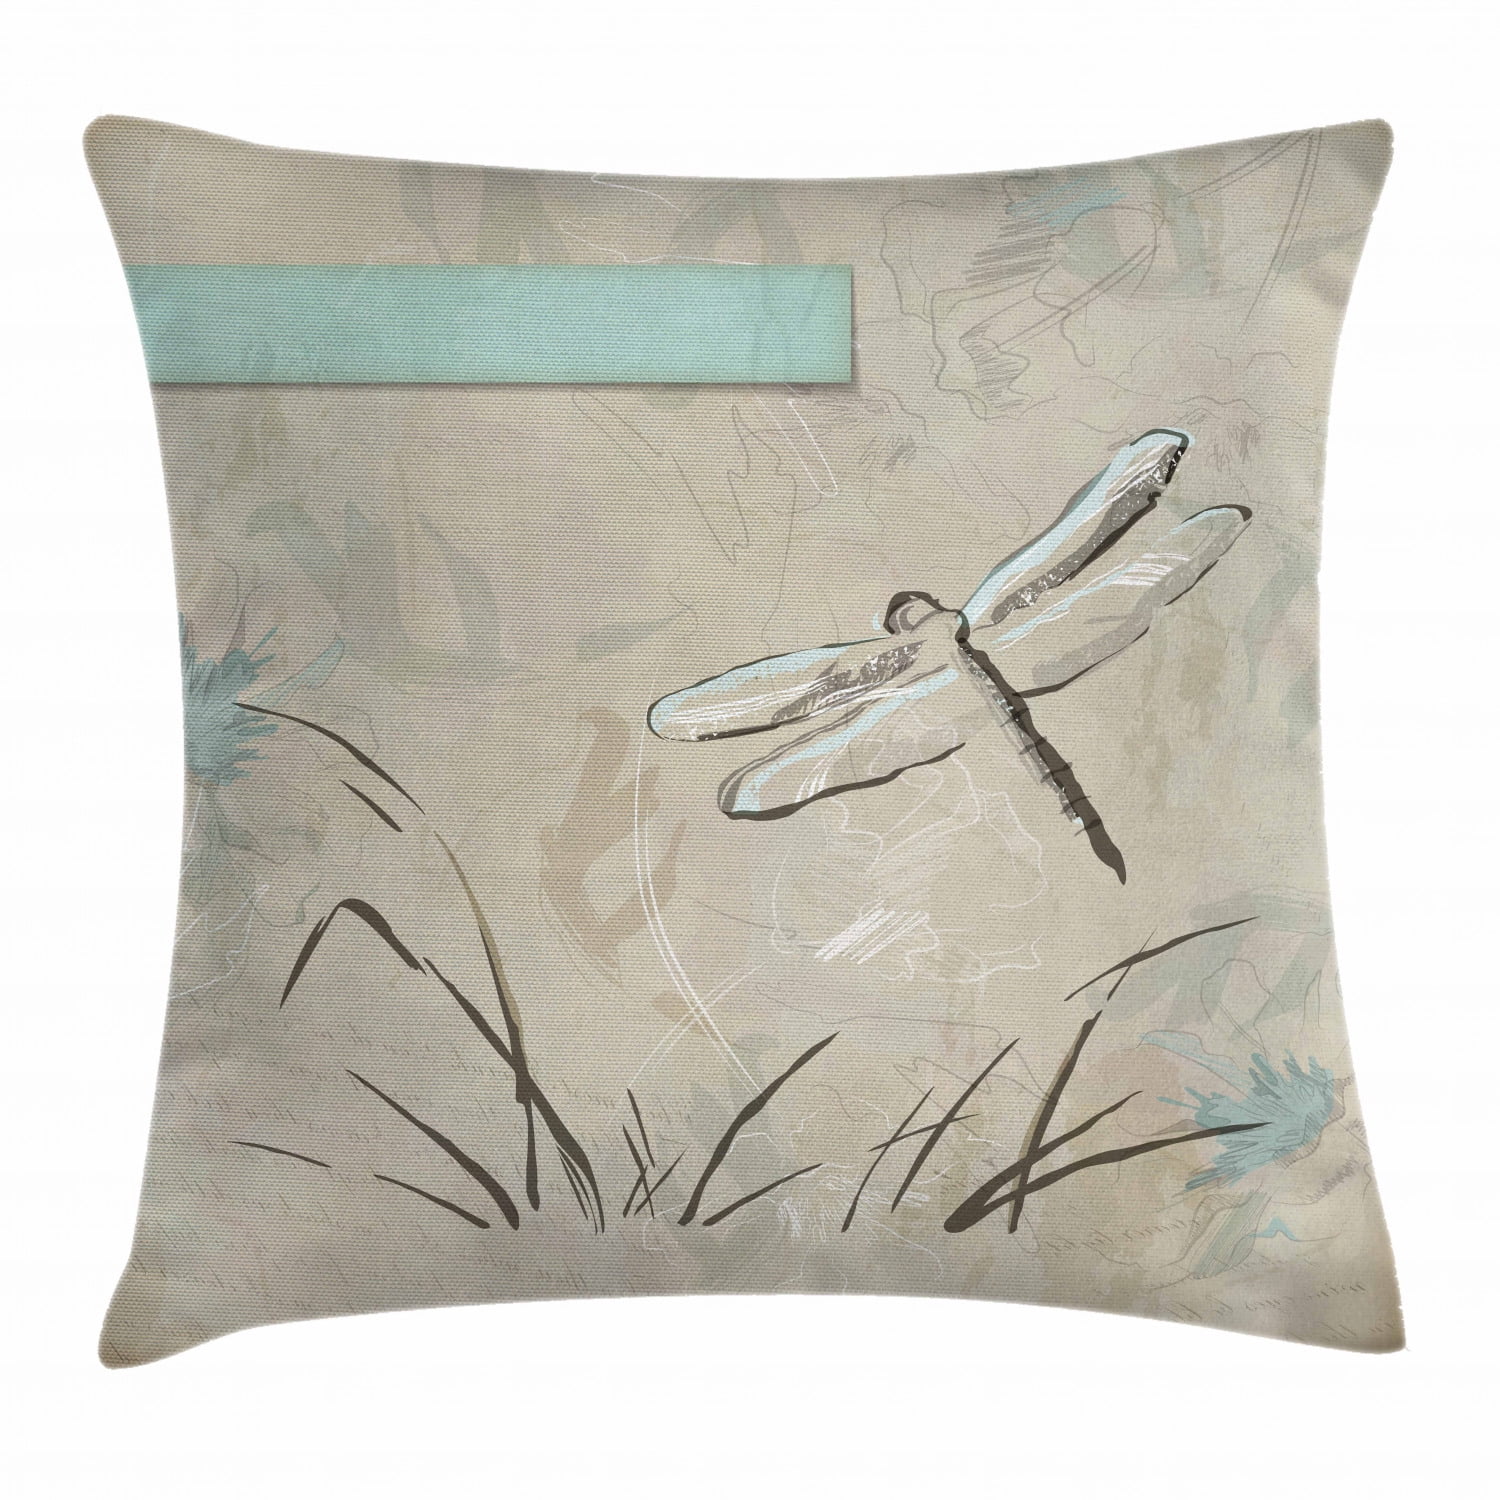 18 X 18 Seafoam Tan Ambesonne Dragonfly Throw Pillow Cushion Cover Decorative Square Accent Pillow Case Romantic Vintage Sketch in Pastel Grass Birthday Grunge Grass Botany Artwork